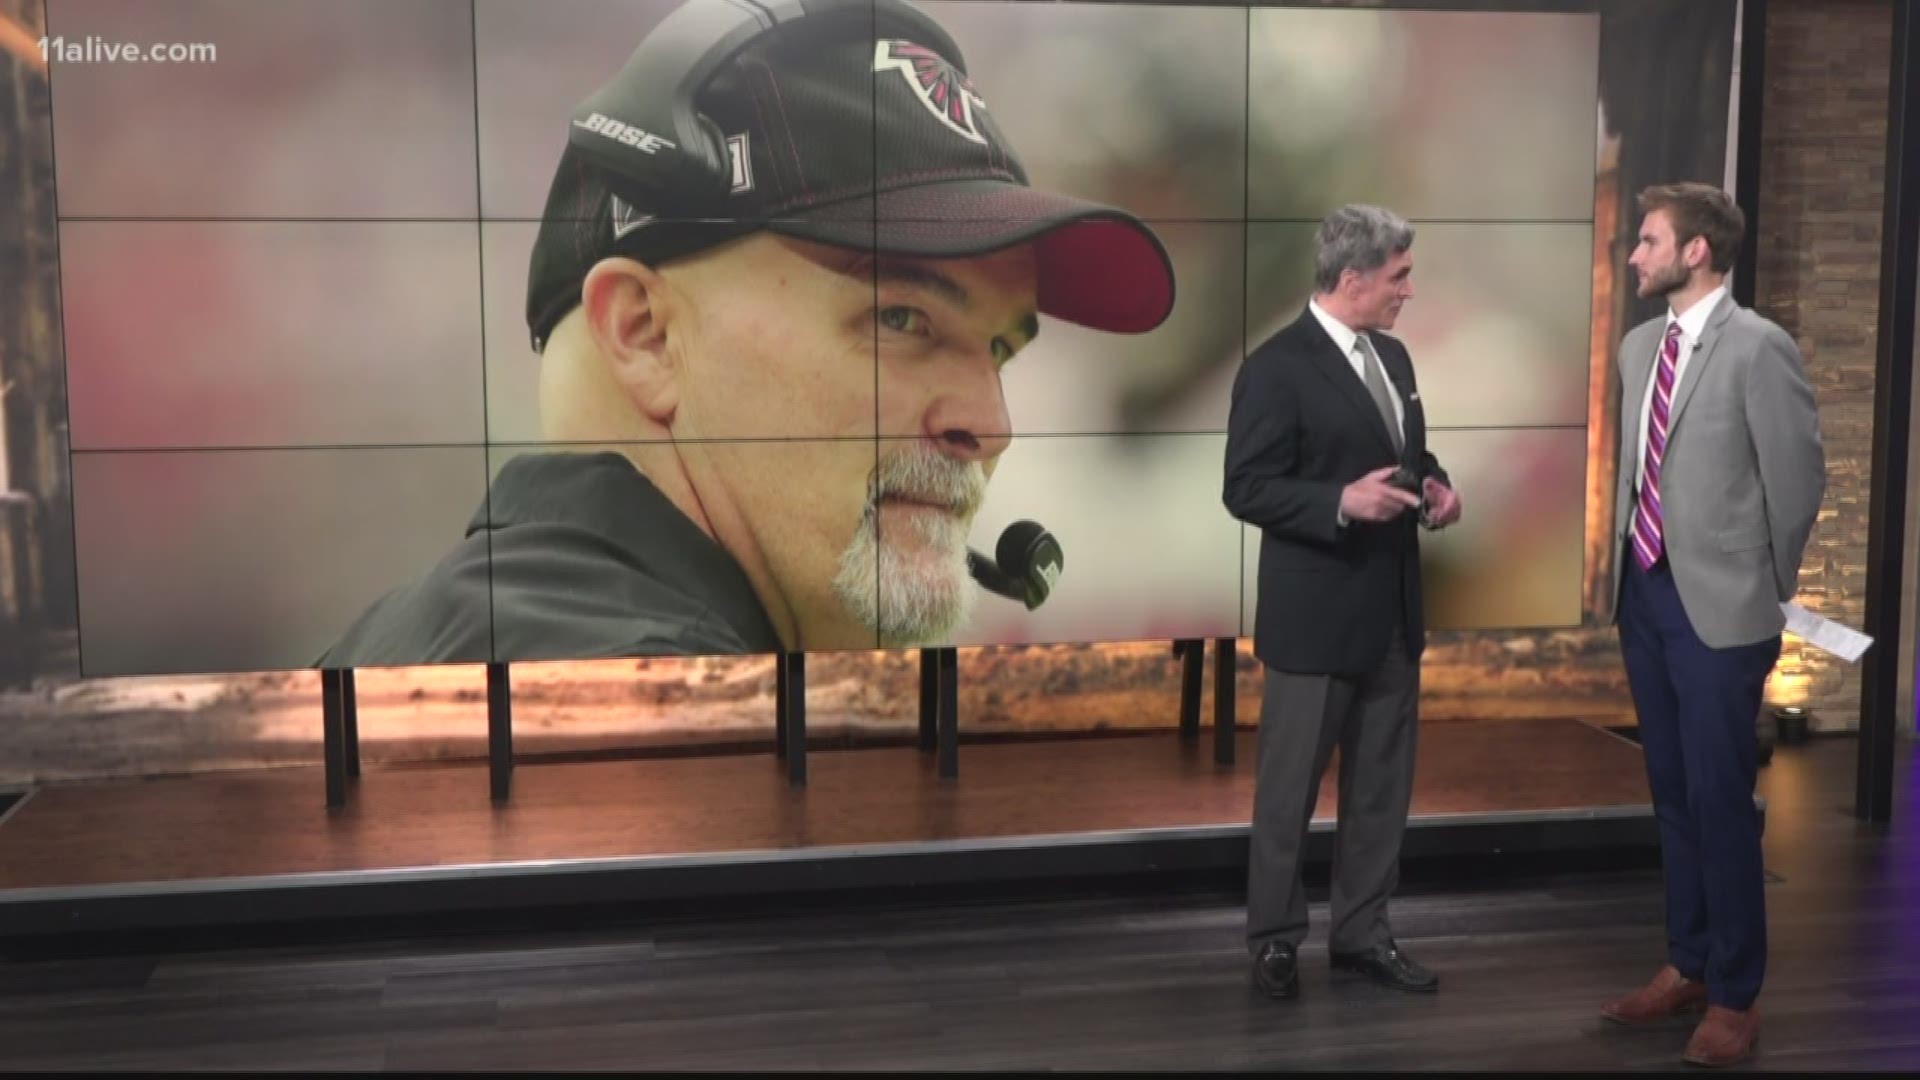 After a disappointing 1-4 start, questions are starting to swirl among sportswriters and fans alike about the coaching situation for the Falcons